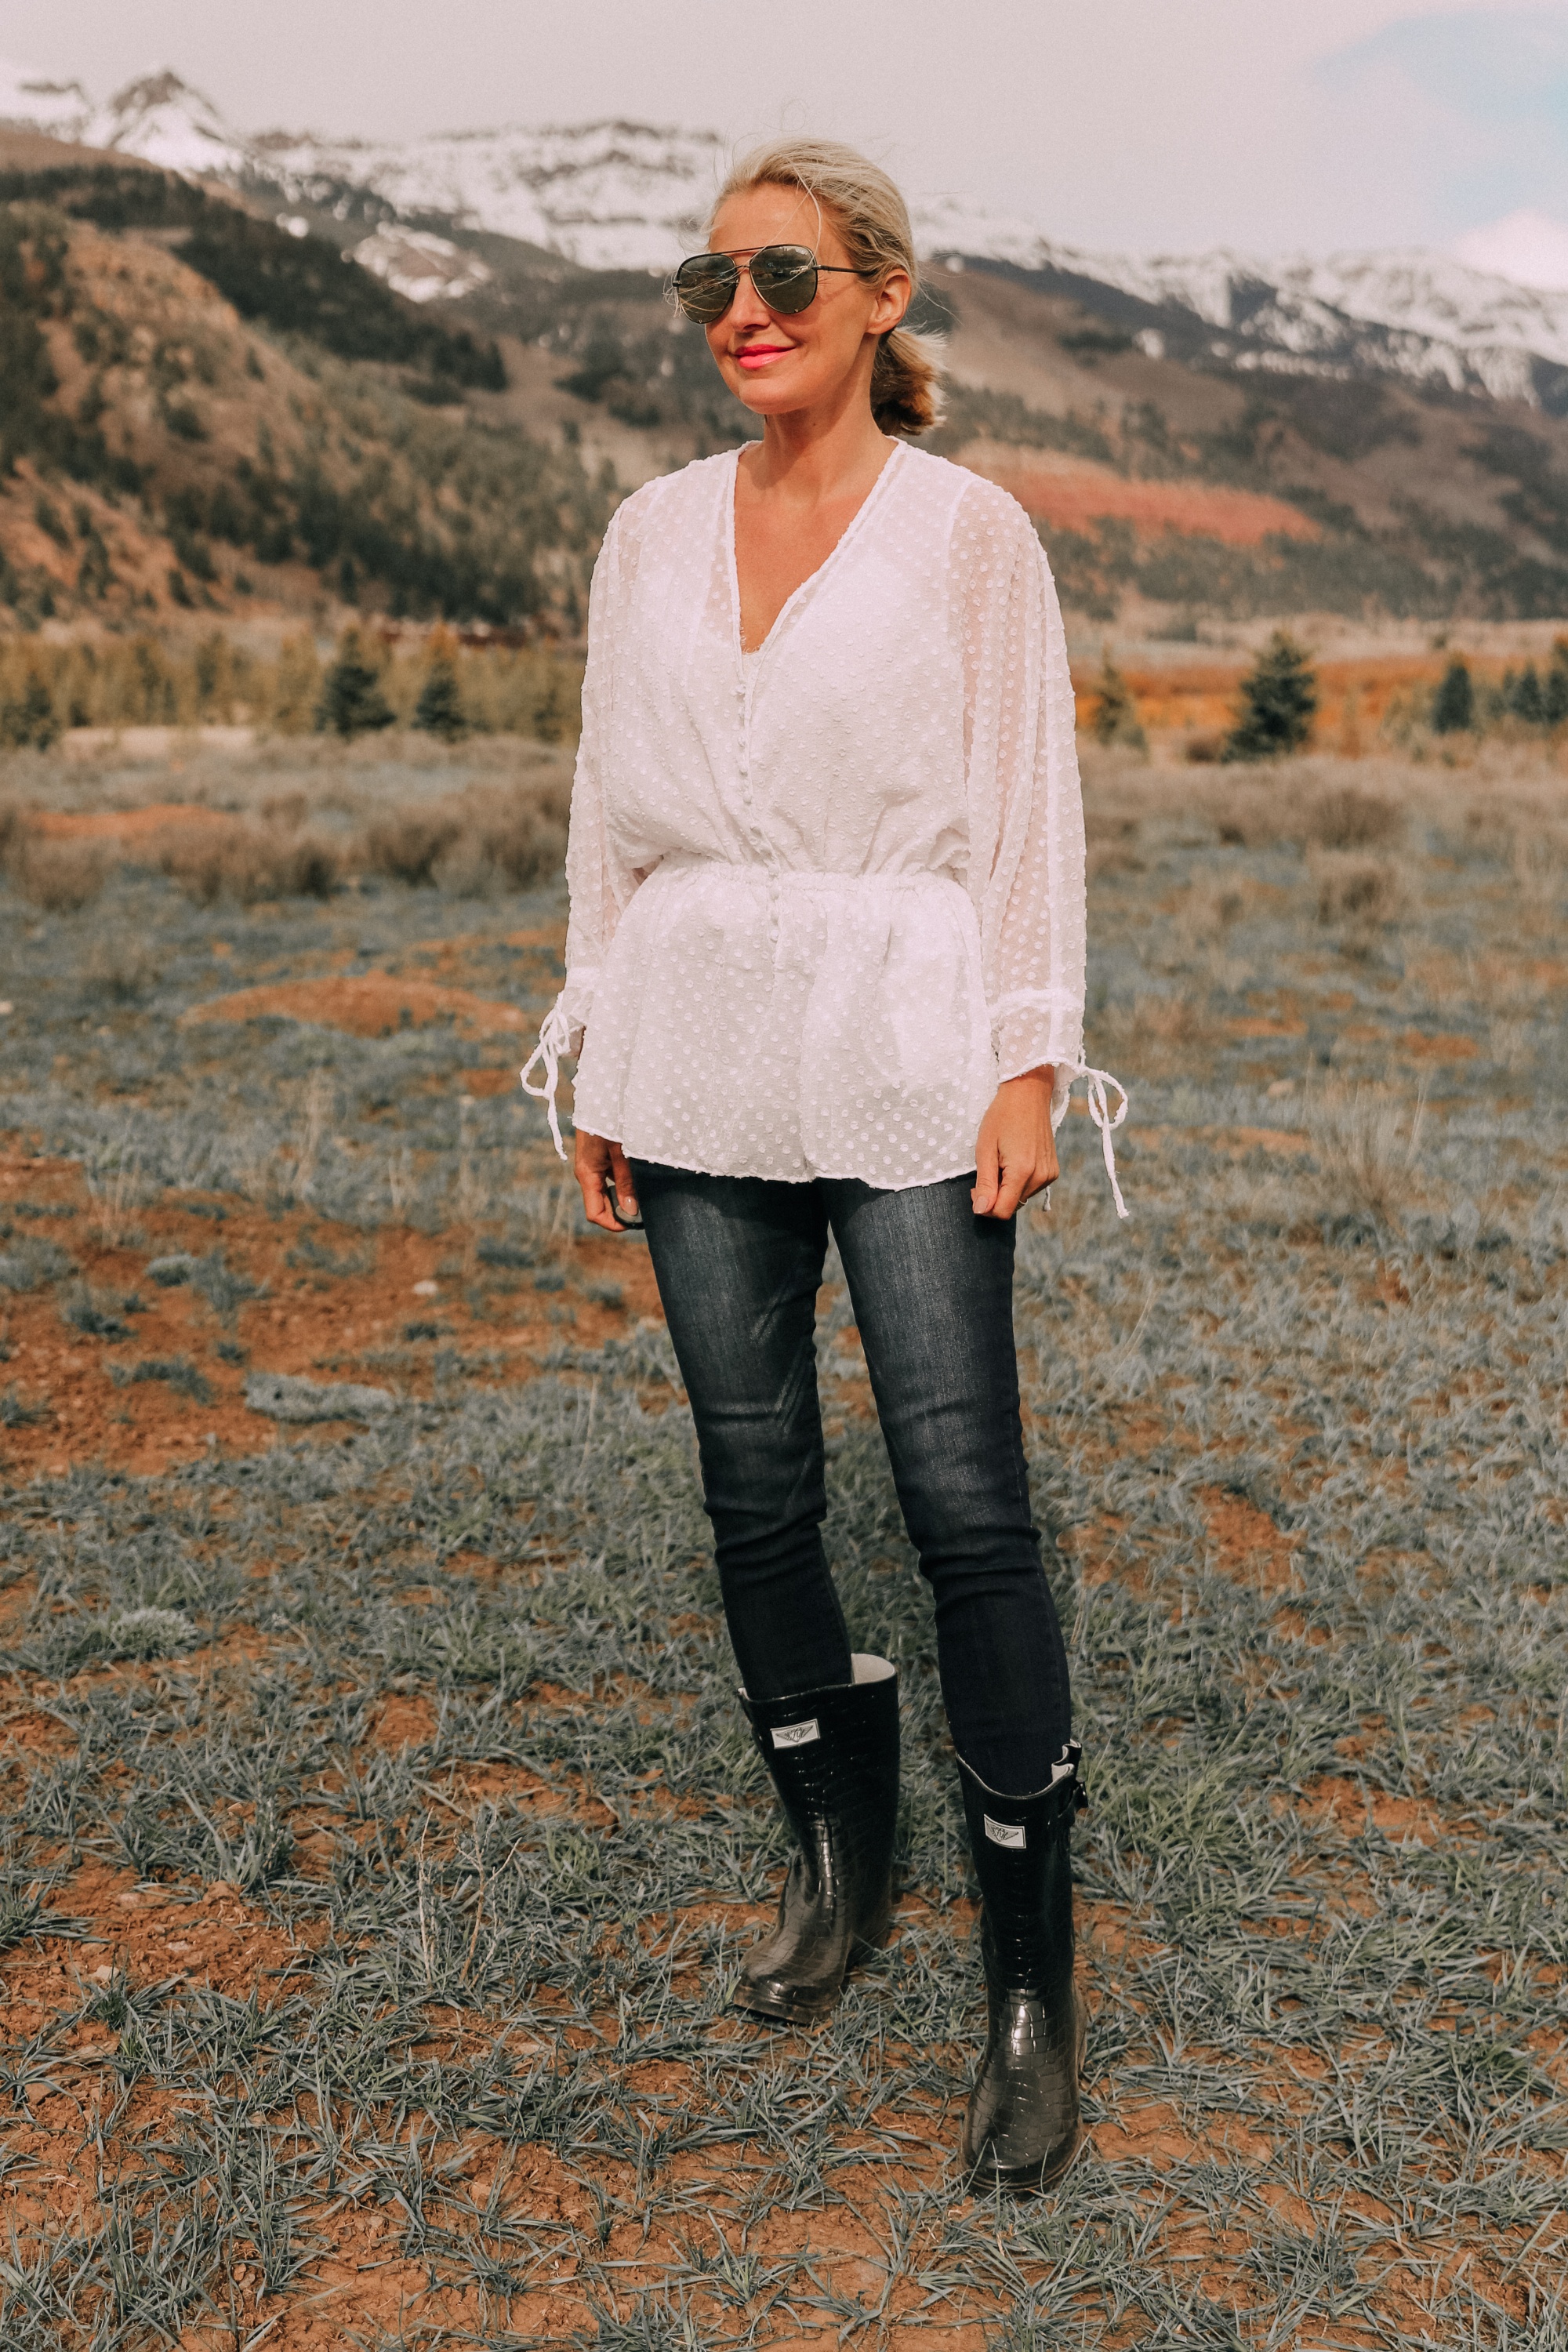 fashion blogger erin busbee in telluride colorado wearing white cinched blouse paired with dark wash skinny ankle jeans styled with croc patterned rubber rain boots